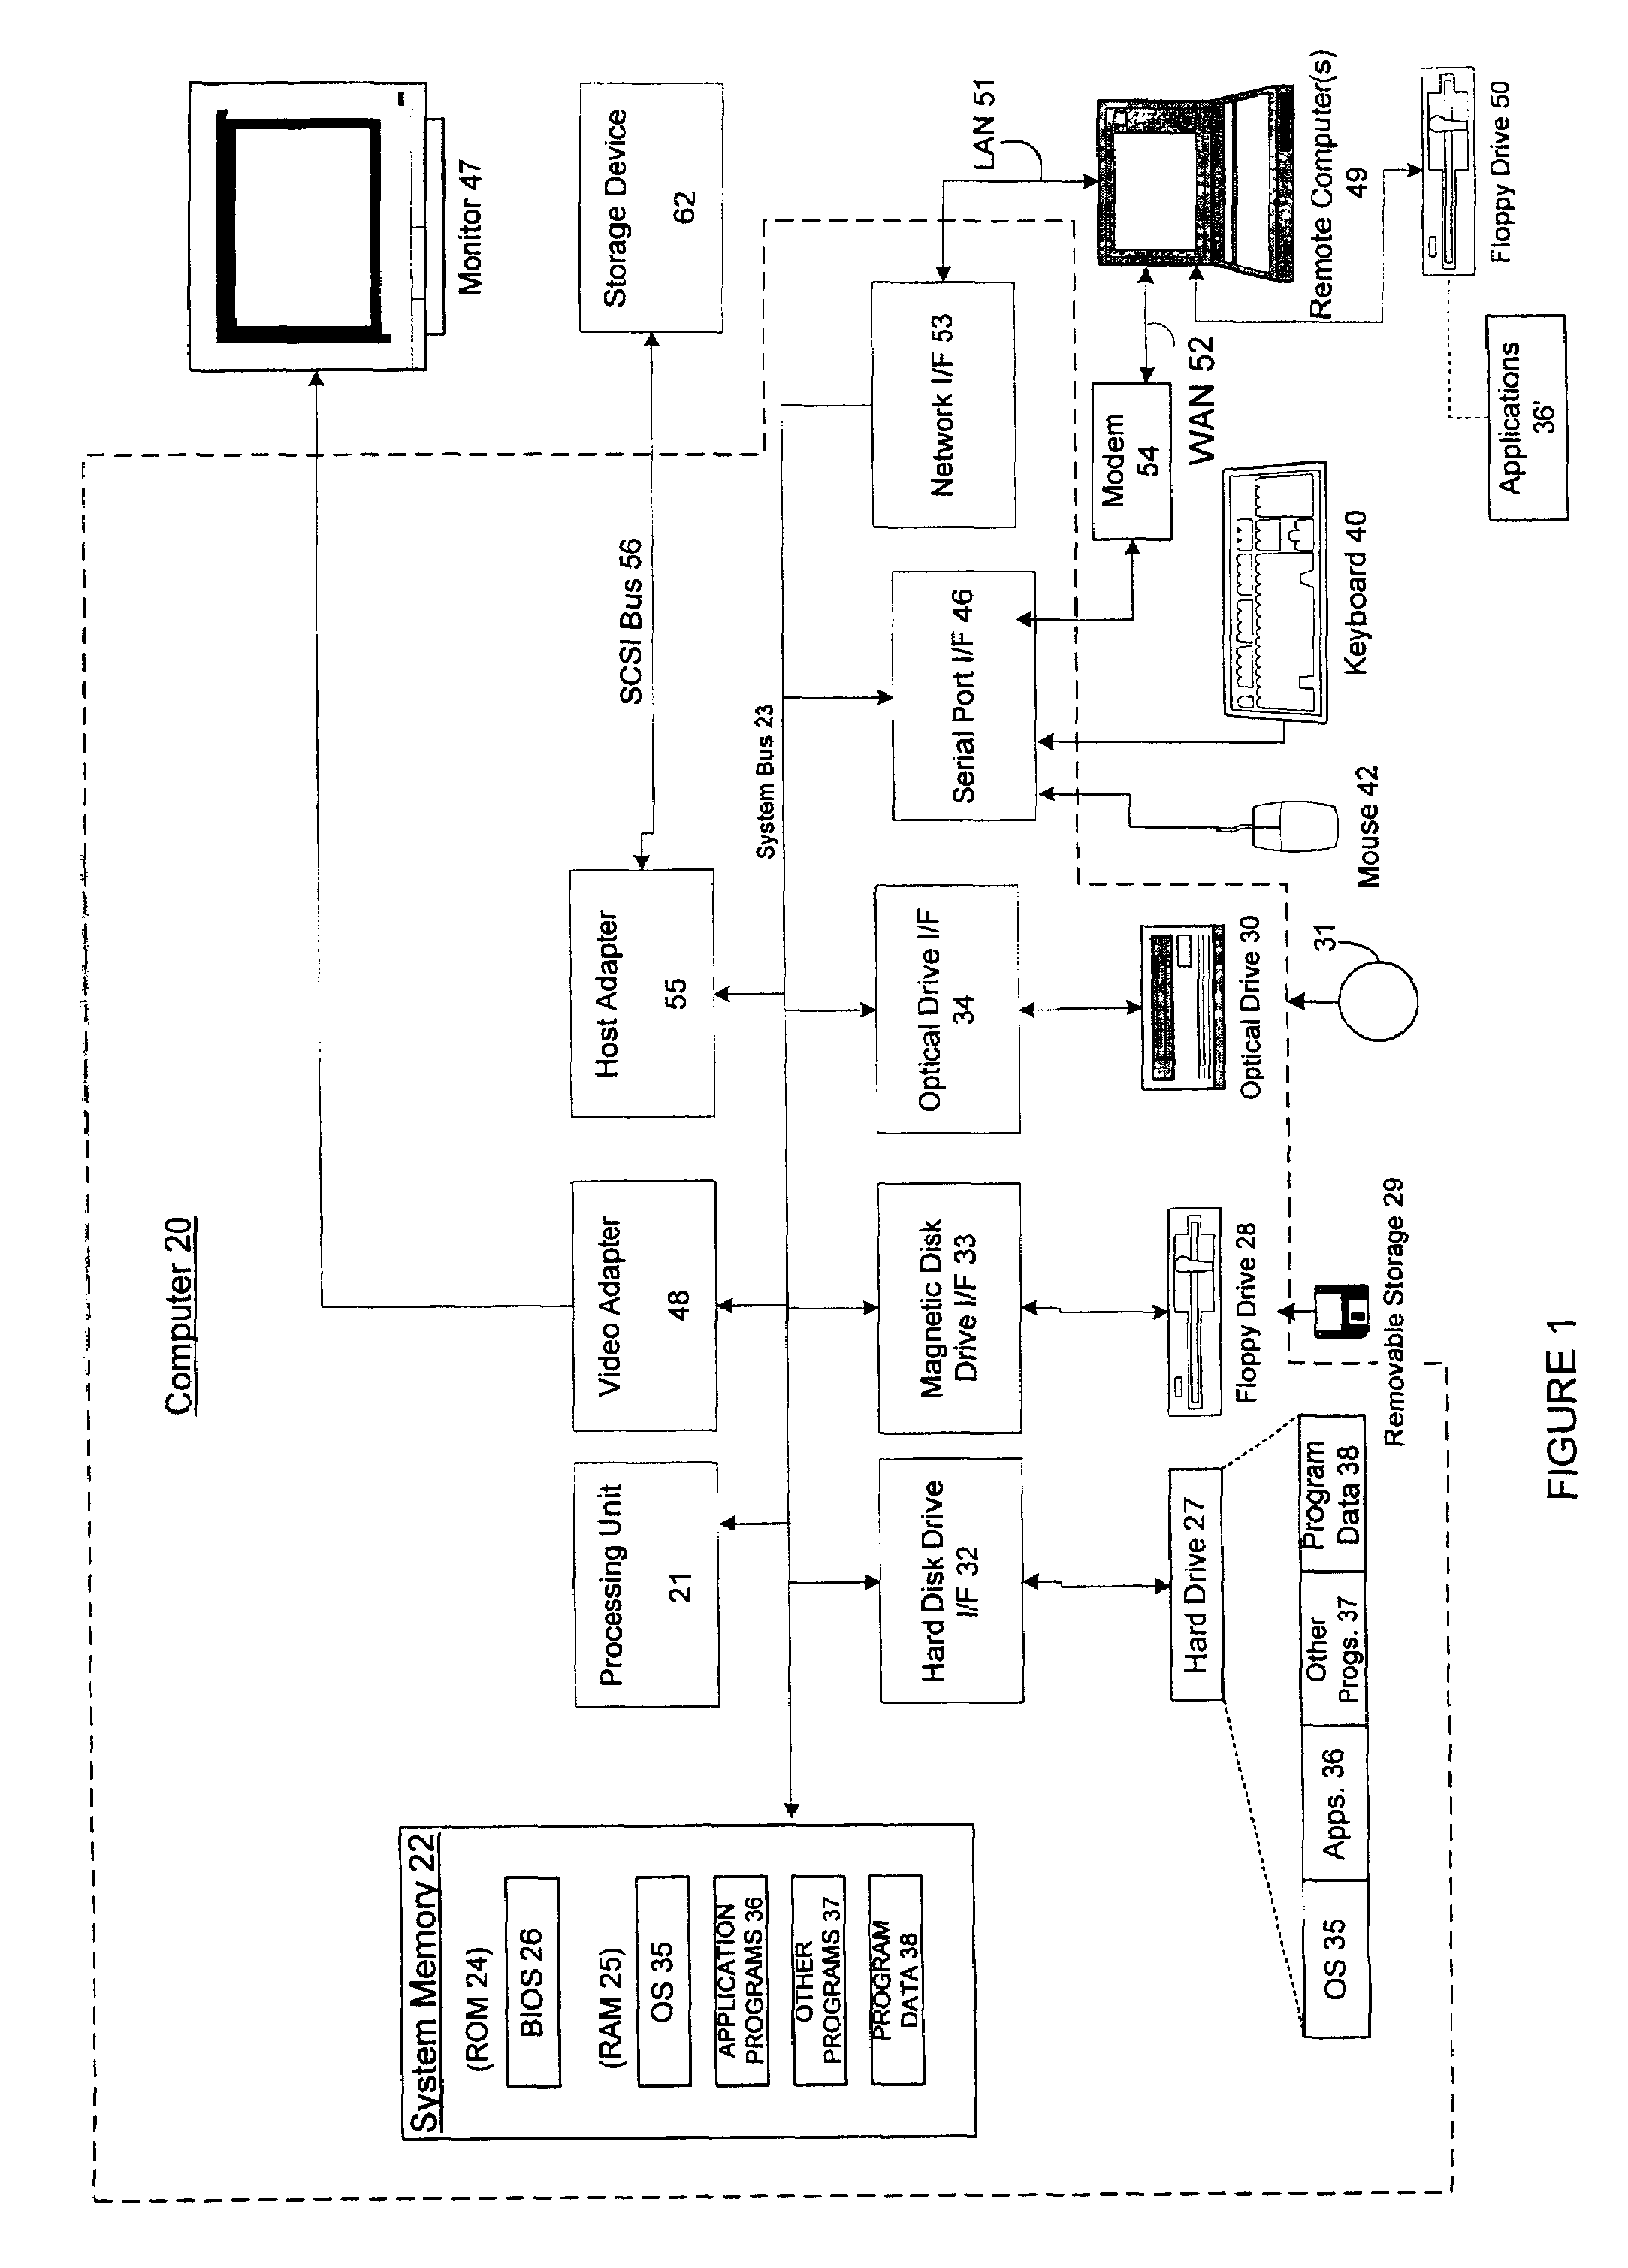 Secure repository with layers of tamper resistance and system and method for providing same